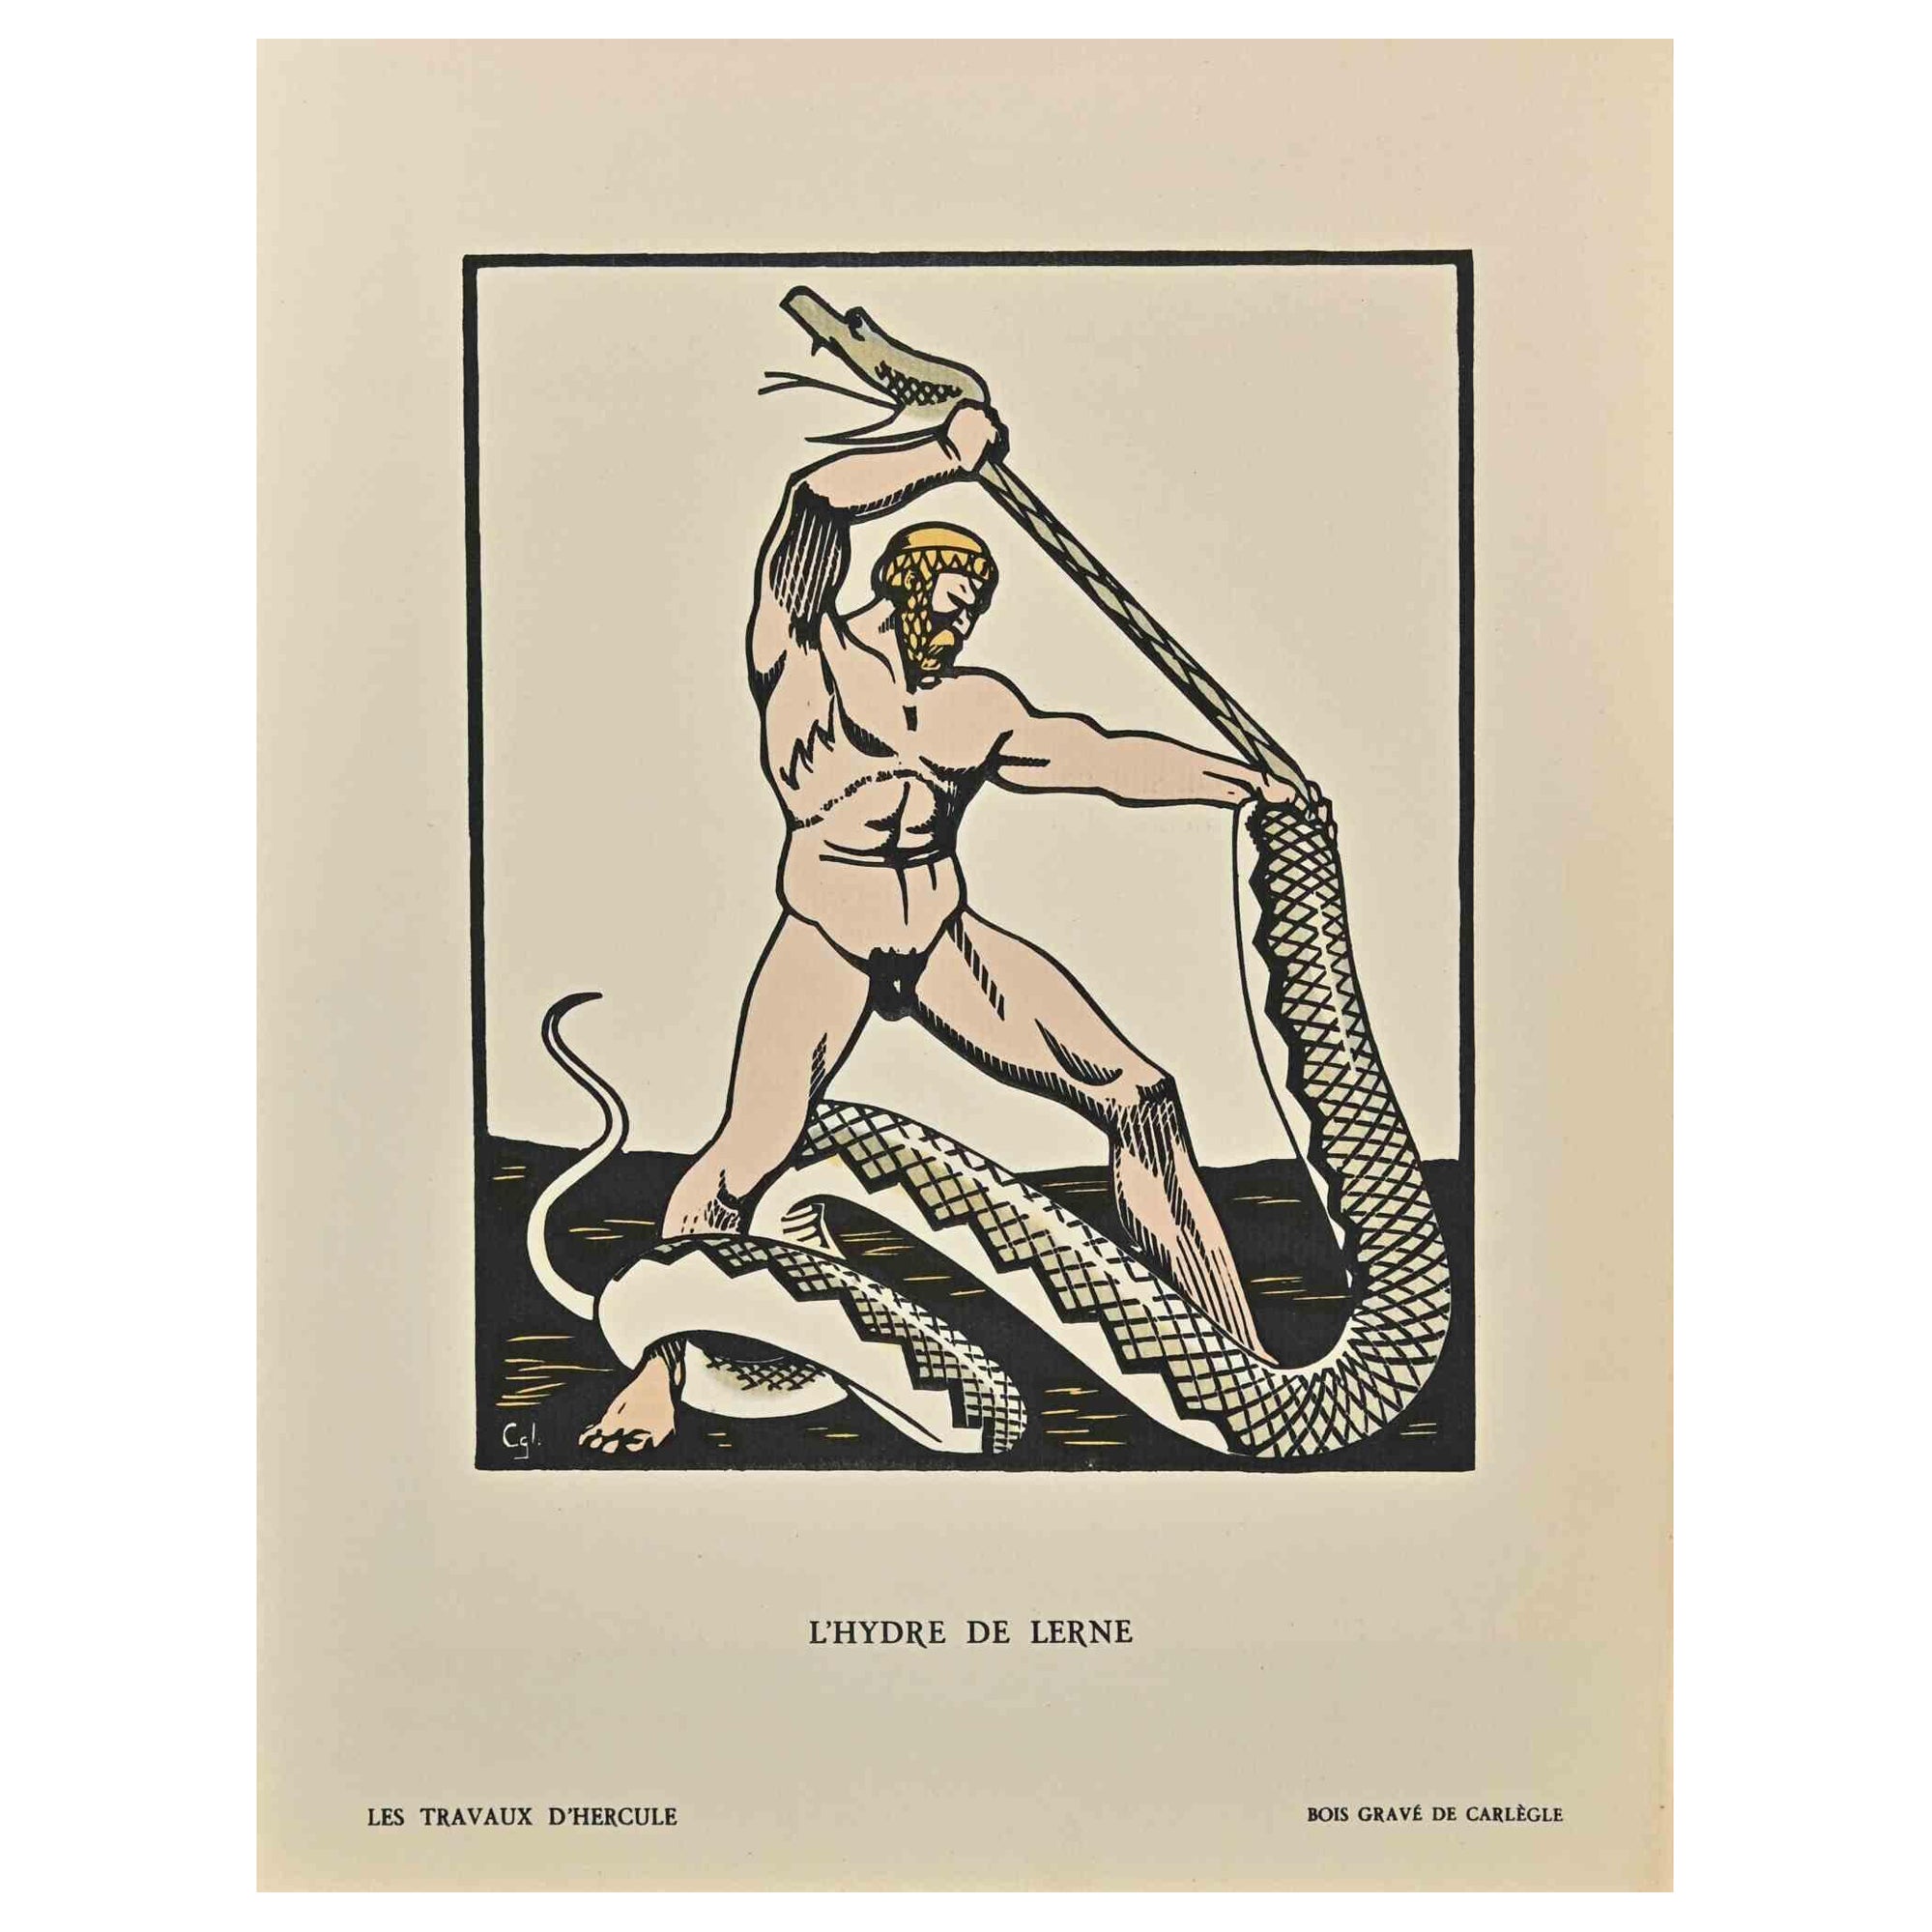 L'Hydre De Lerne is a woodcut print realized by Carlègle (Charles Emile Egli, 30 March 1877 – 11 January 1937) in the Early 20th Century.

Belongs to the Suite "Les Travaux D'Hercule".

Good condition on a yellowed cardboard.

Titled, Stamp Signed